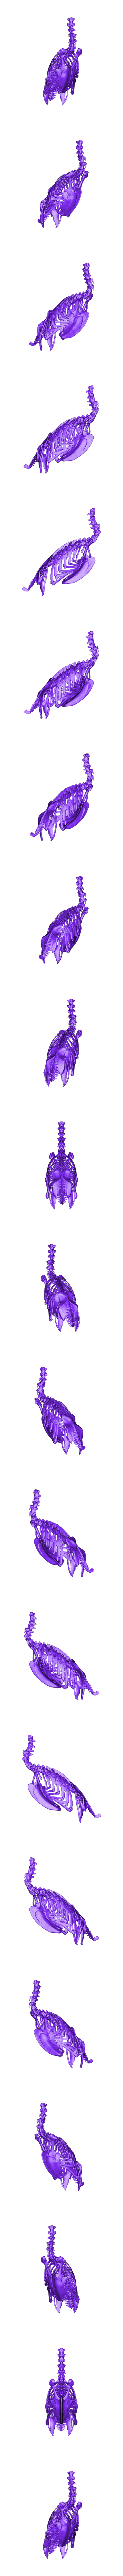 NEW-Spine-chest-repaired-repaired-repaired.stl Download STL file Macow Skeleton • Object to 3D print, HarryHistory